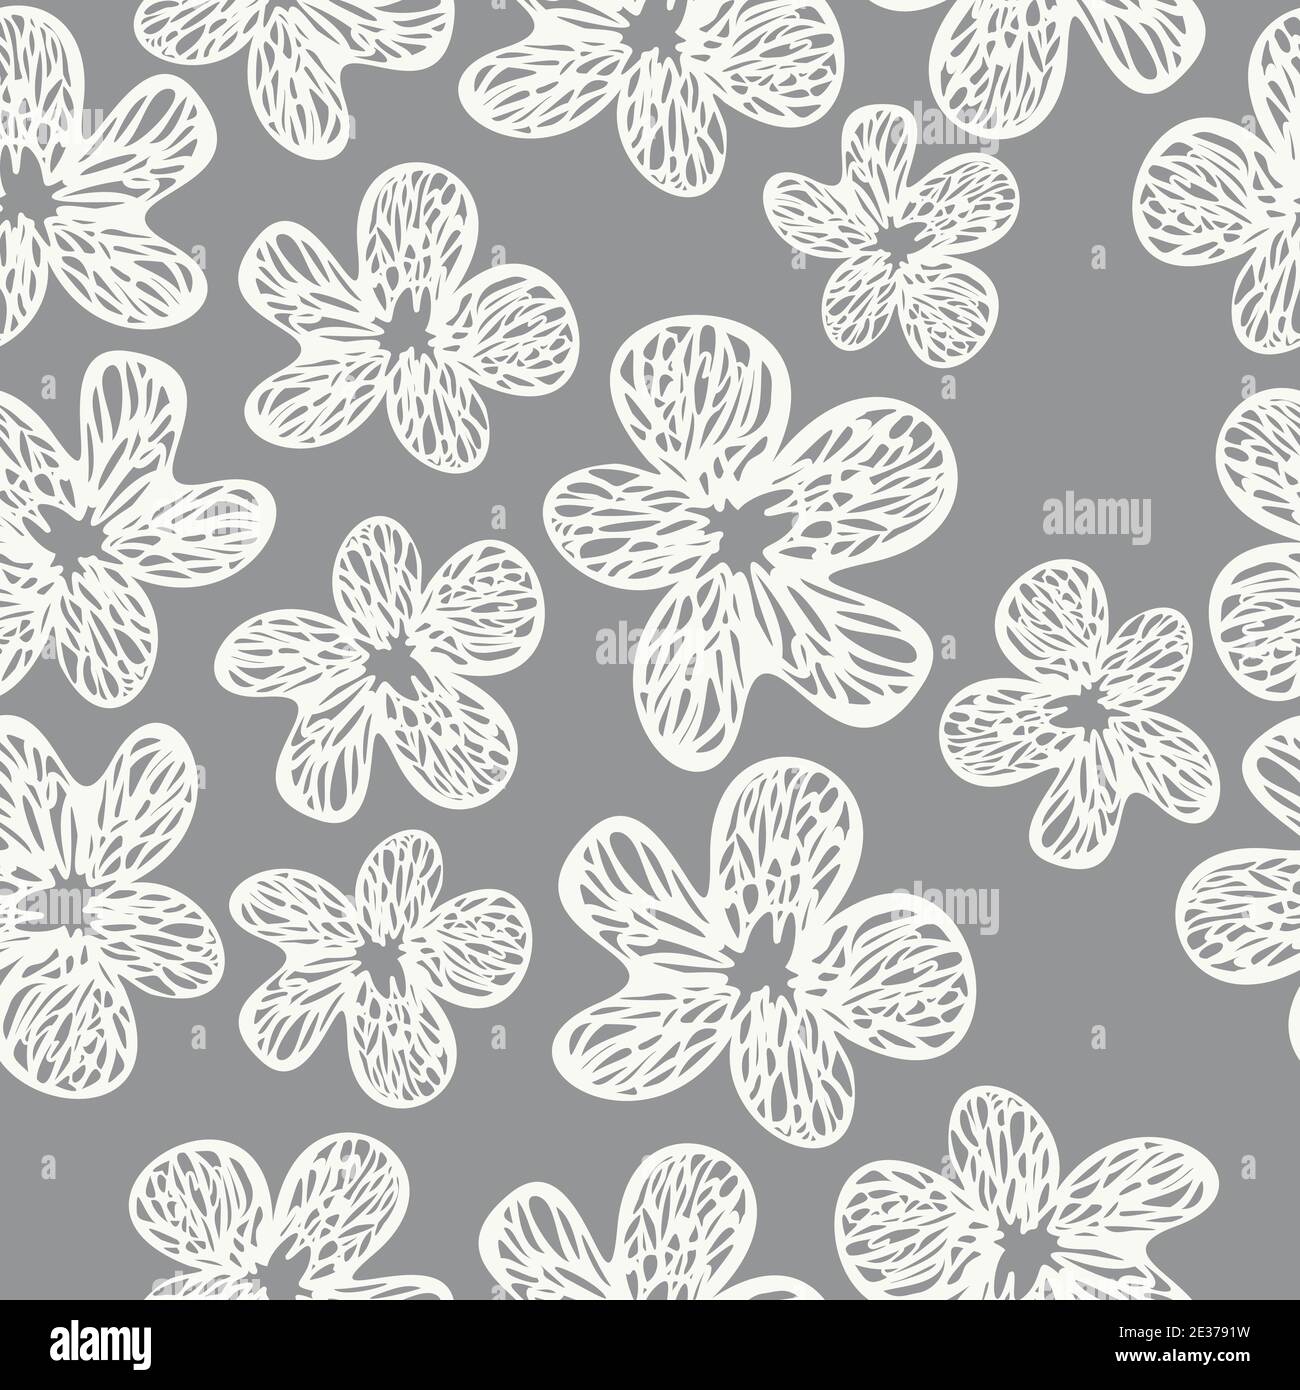 Vector seamless pattern of abstract blooming flowers. Botanical design with flowers in ultimate gray and white colors. Stock Vector